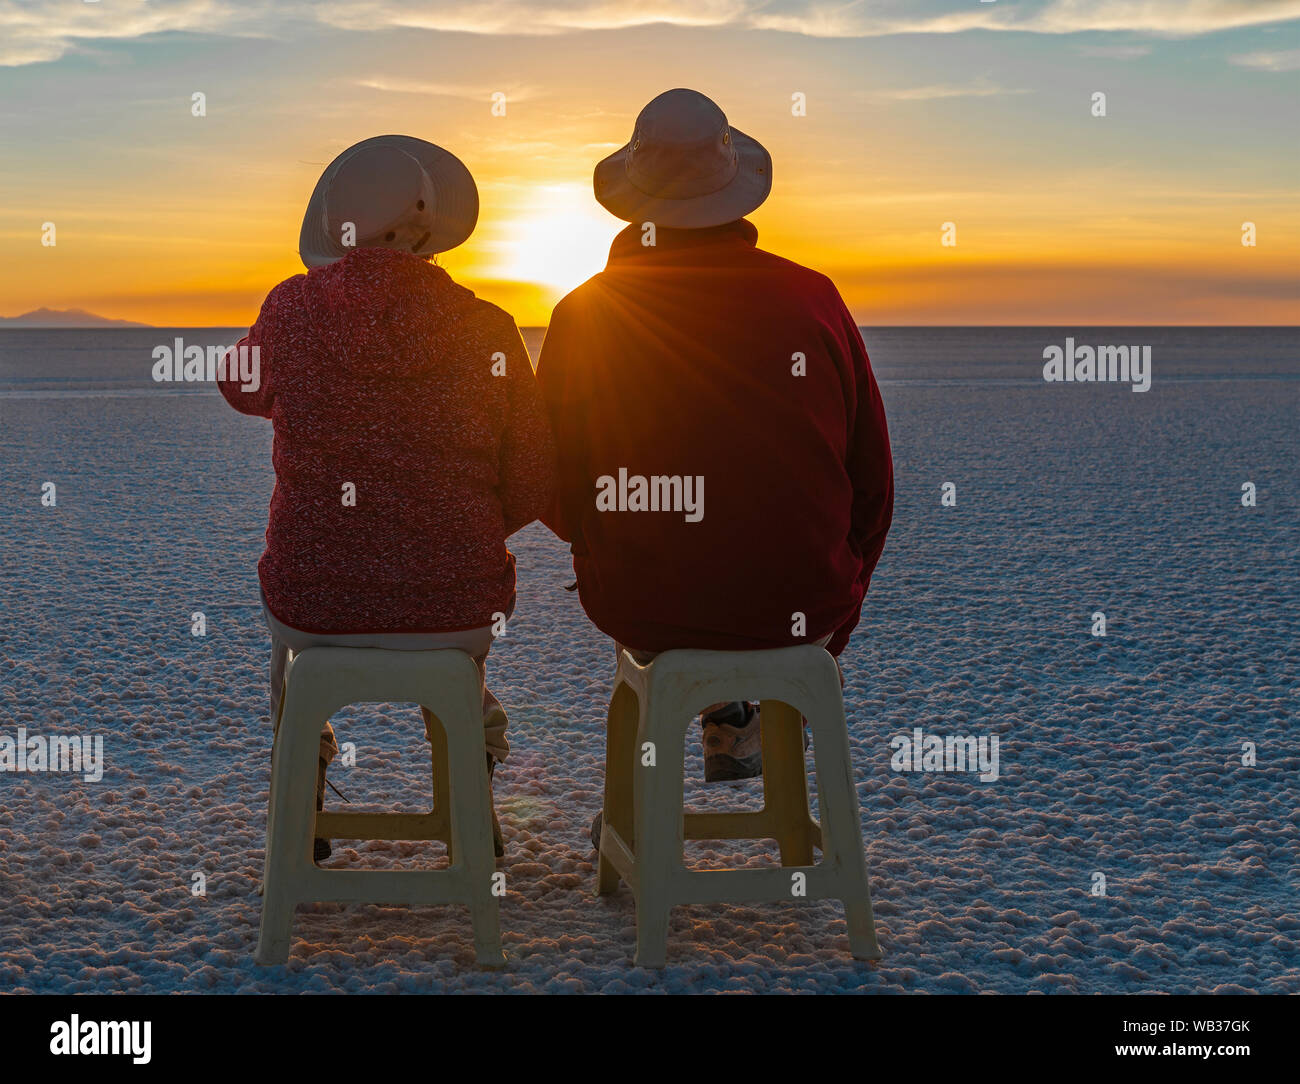 A couple of tourists sitting on benches and enjoying a sunset in the Uyuni salt flat desert with lens flare, Andes mountain range altiplano, Bolivia. Stock Photo